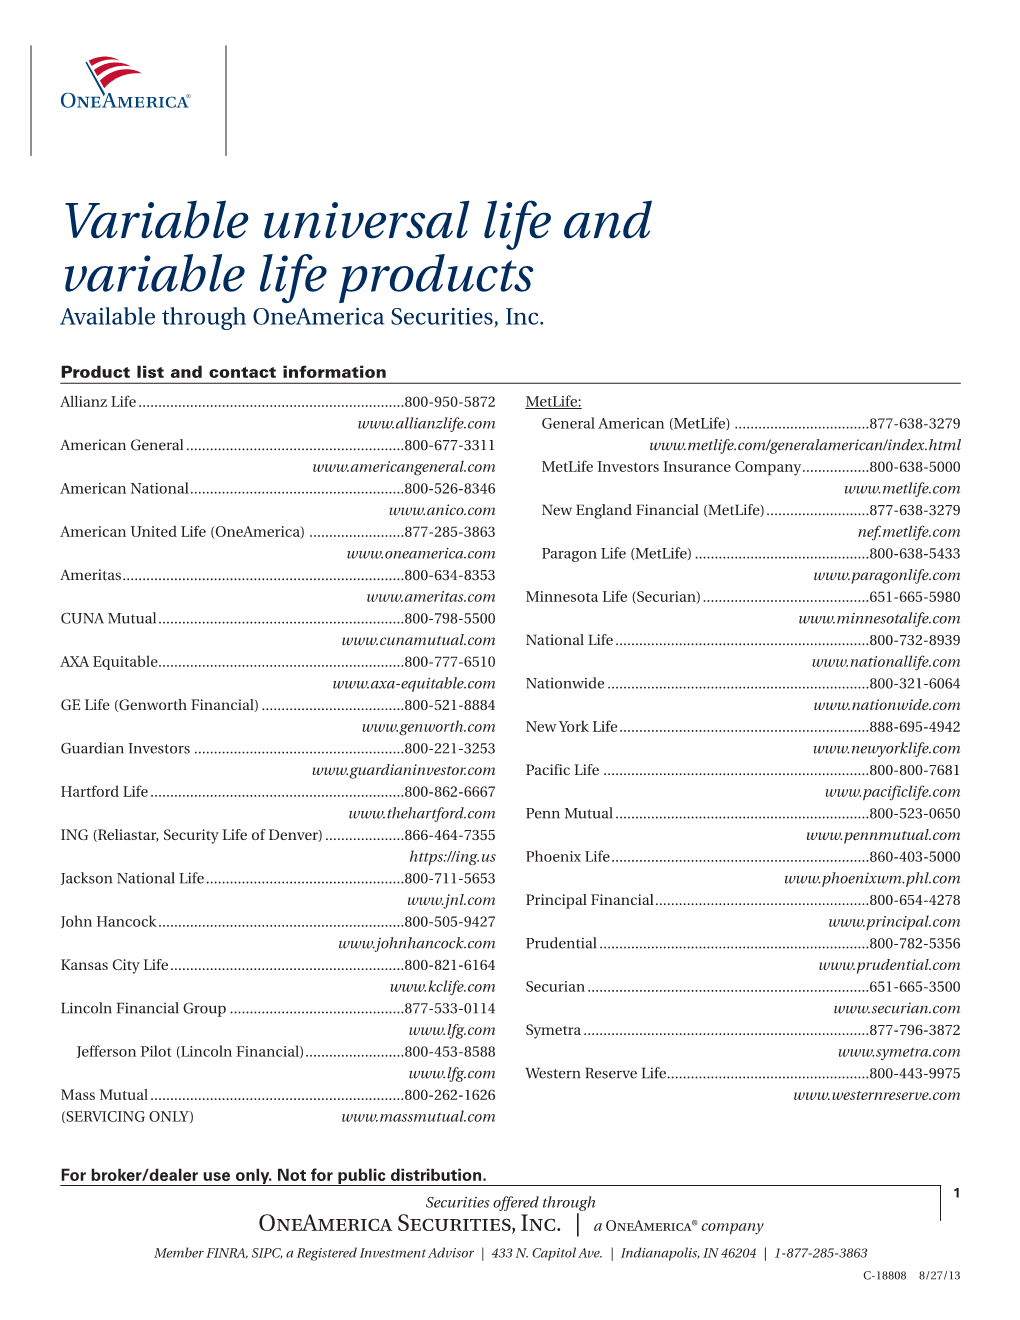 Variable Universal Life and Variable Life Products Available Through Oneamerica Securities, Inc